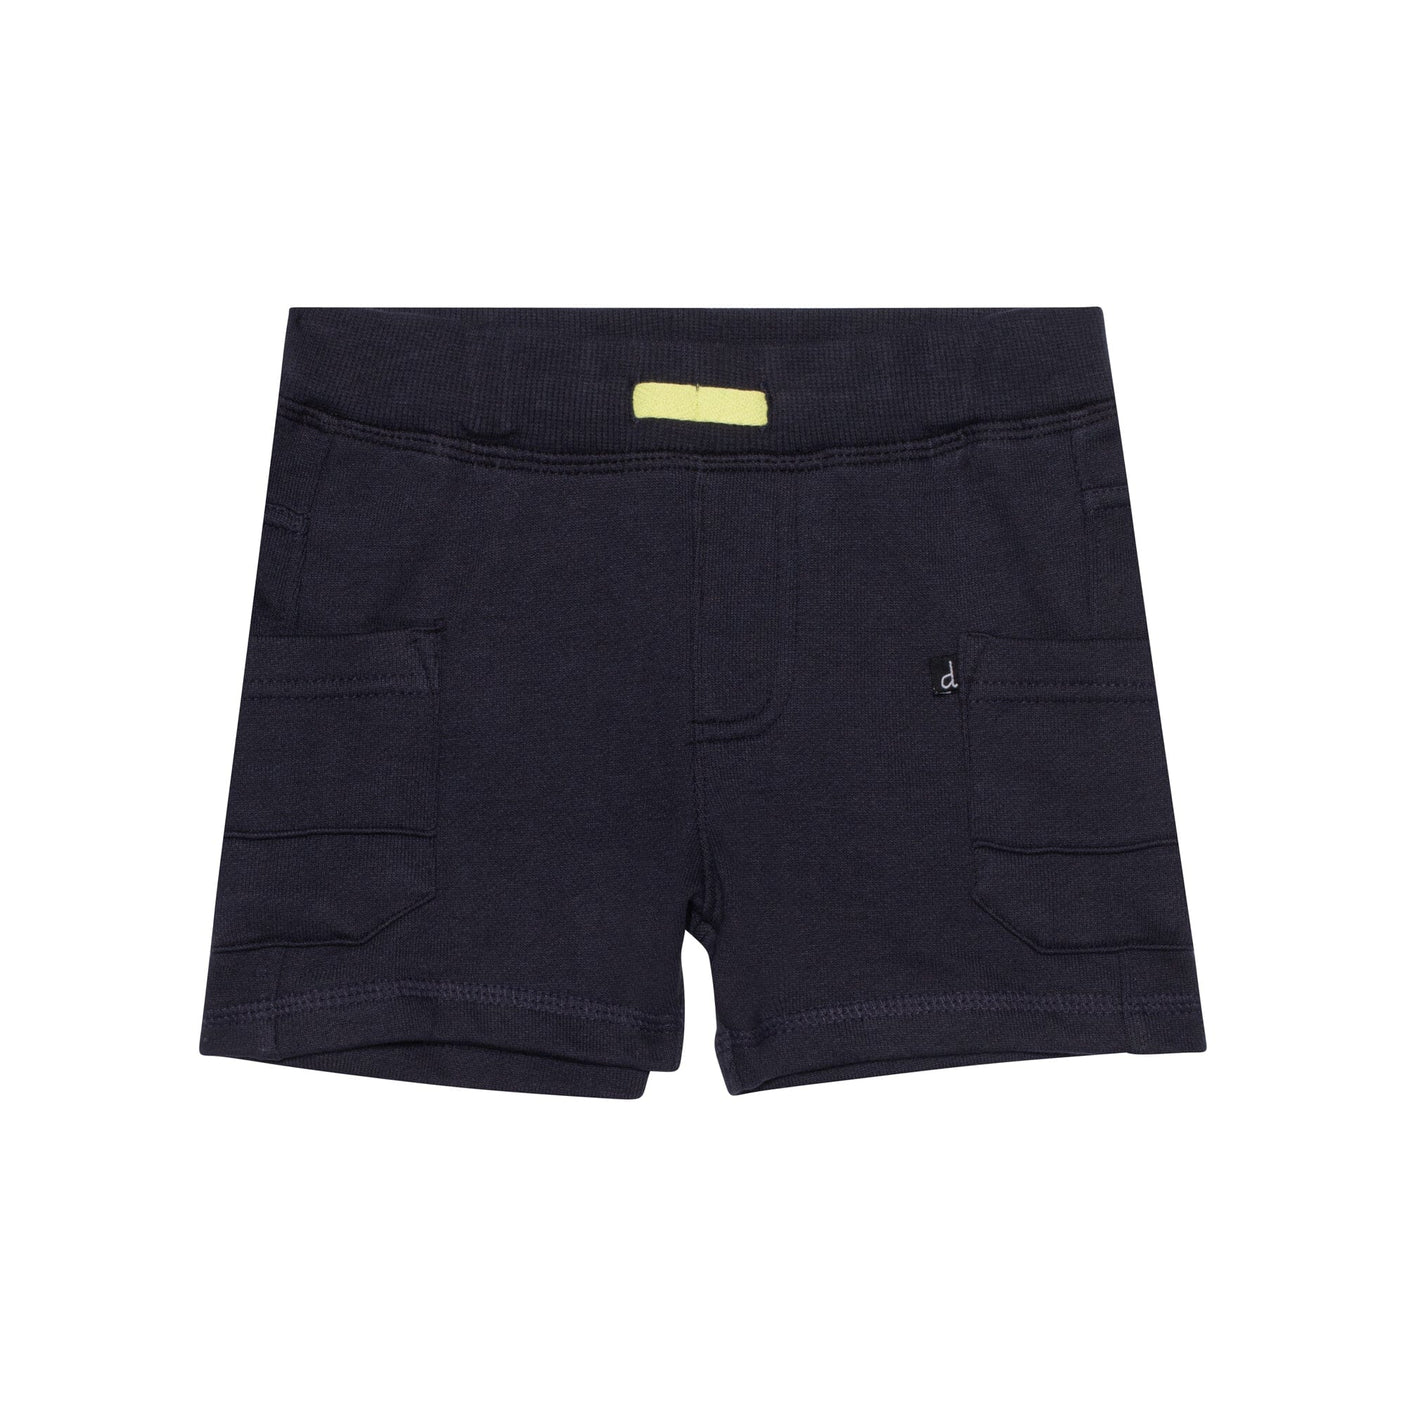 French Terry Short Dark Grey With Pockets-0